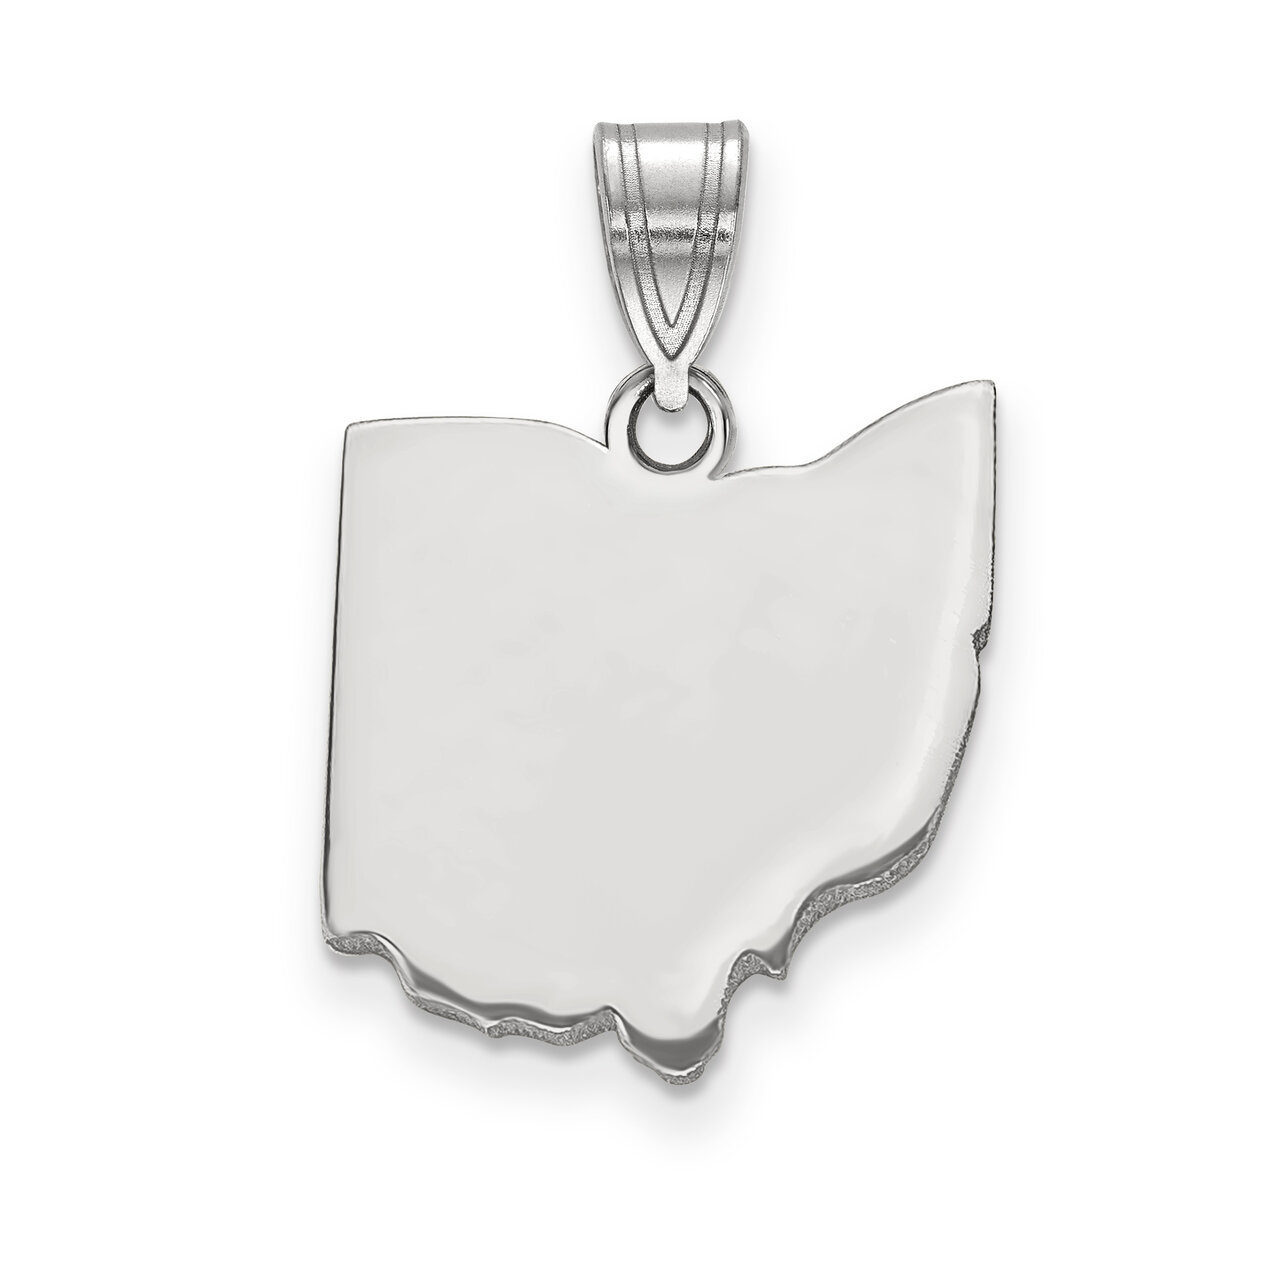 Ohio State Pendant Charm Sterling Silver Engravable XNA707SS-OH